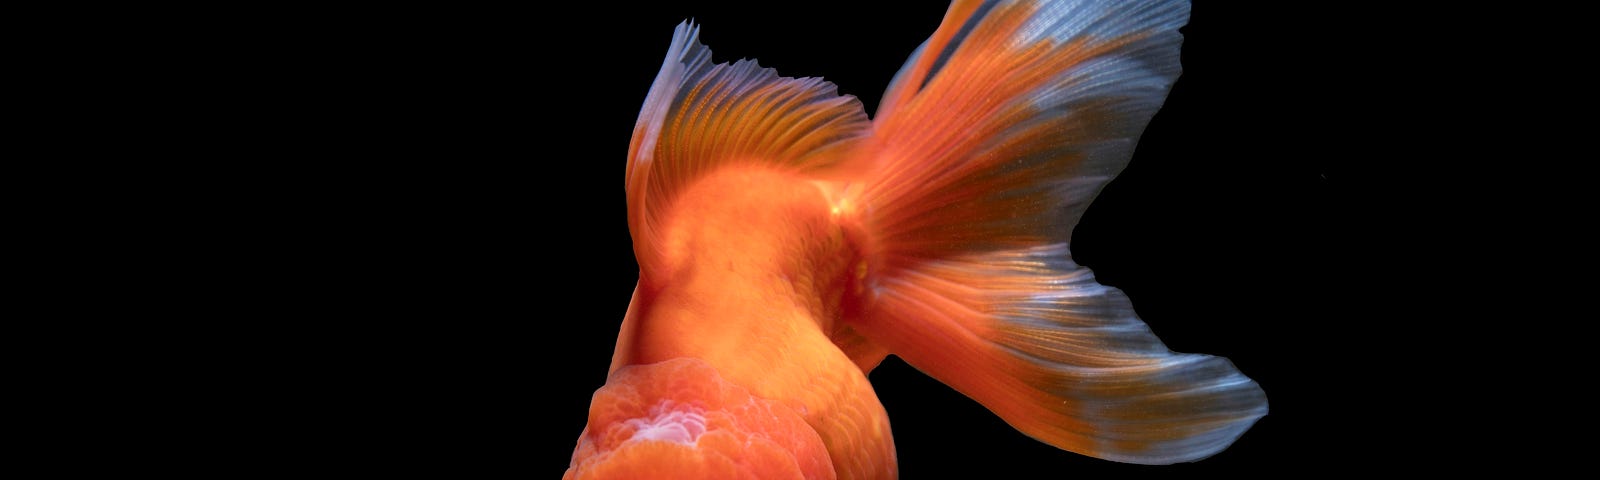 A vibrant goldfish in complete darkness